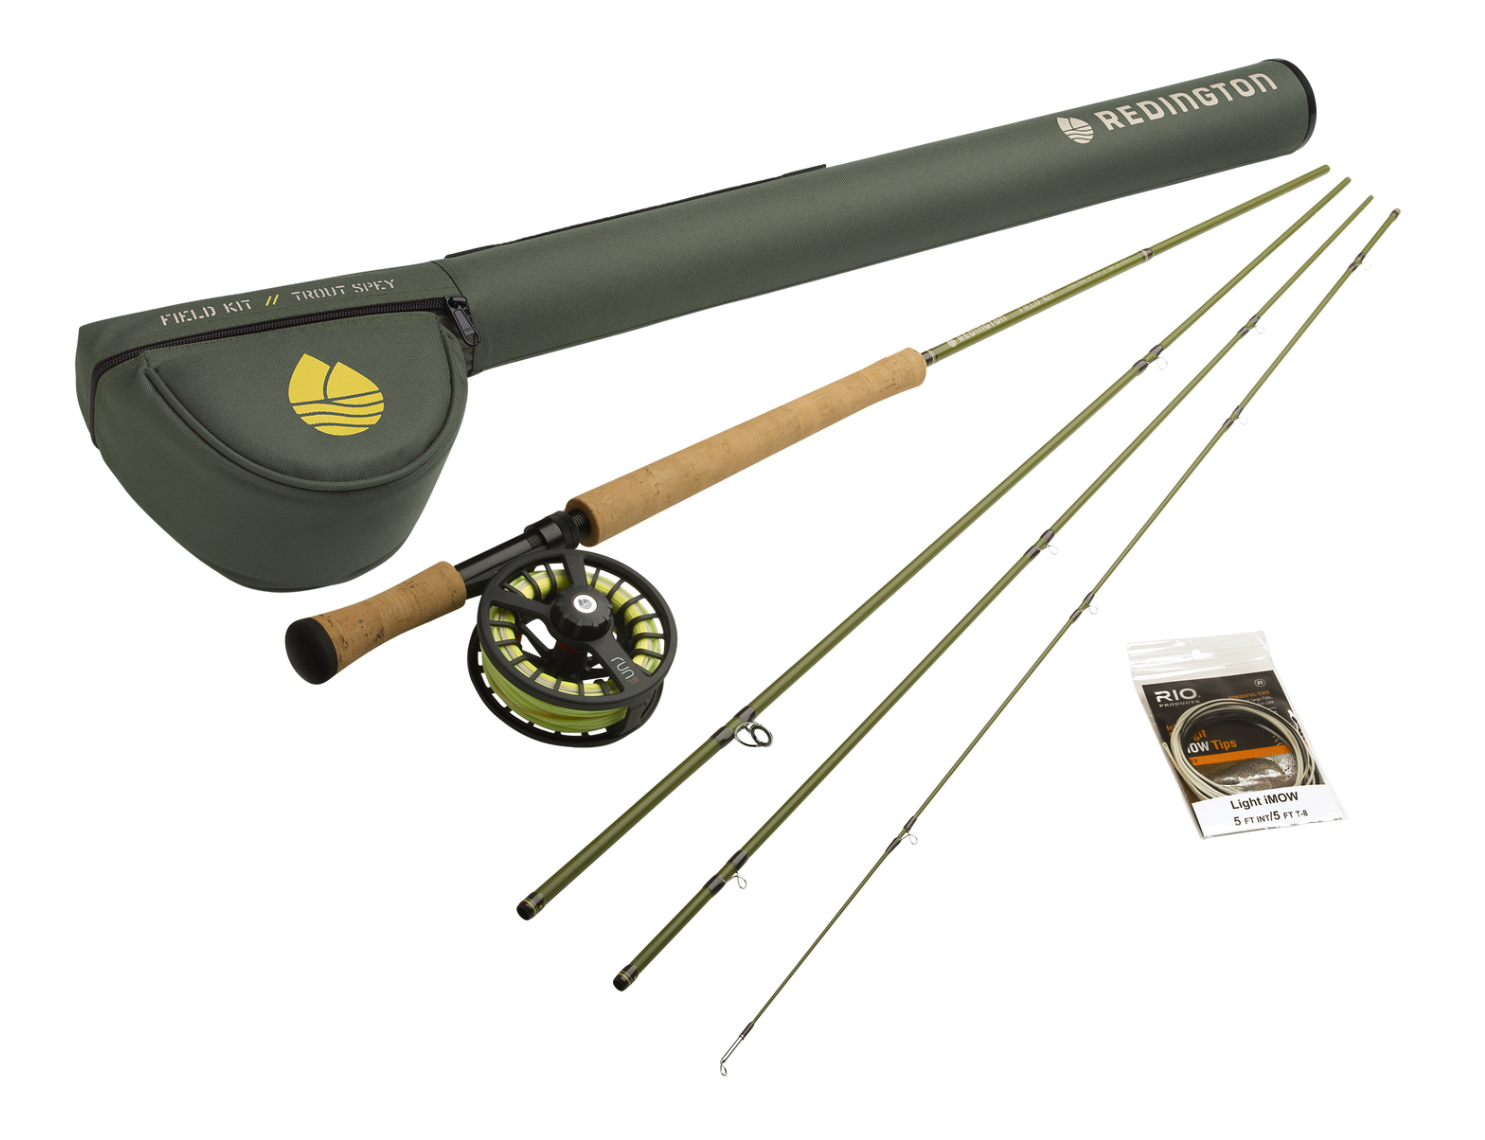 Premium Fly Fishing Rod & Reel Outfits for Sale